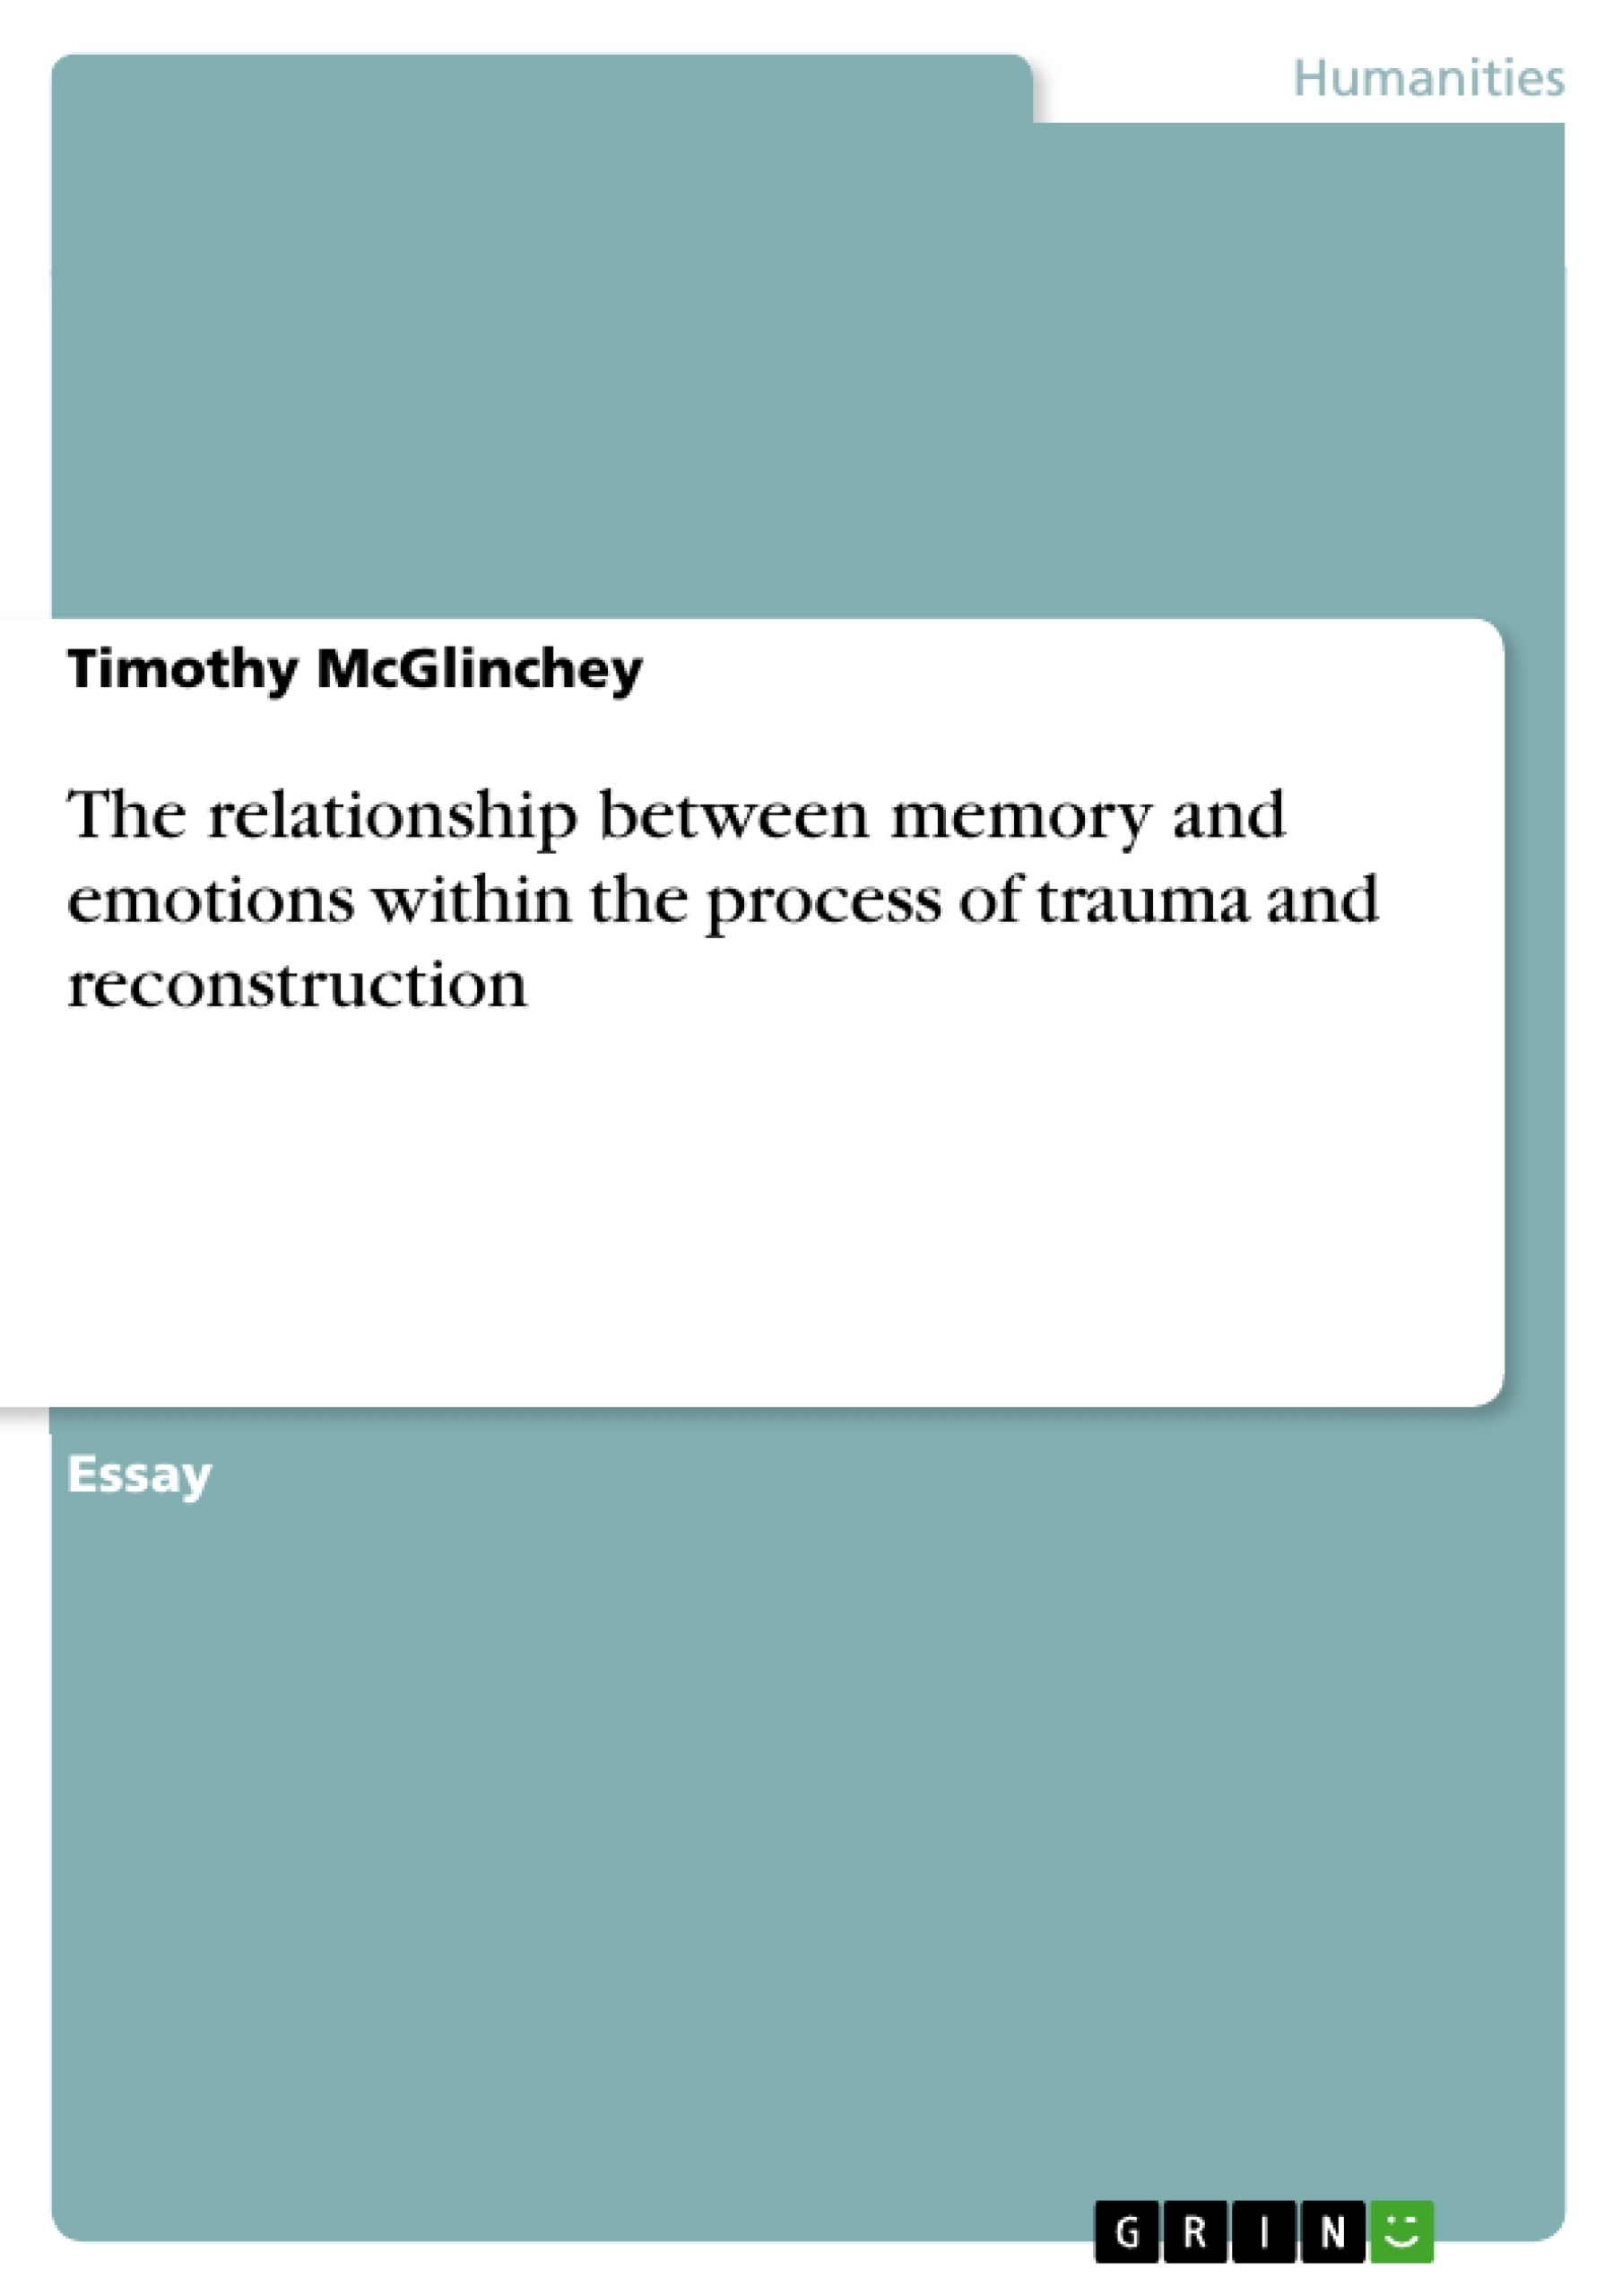 Título: The relationship between memory and emotions within the process of trauma and reconstruction